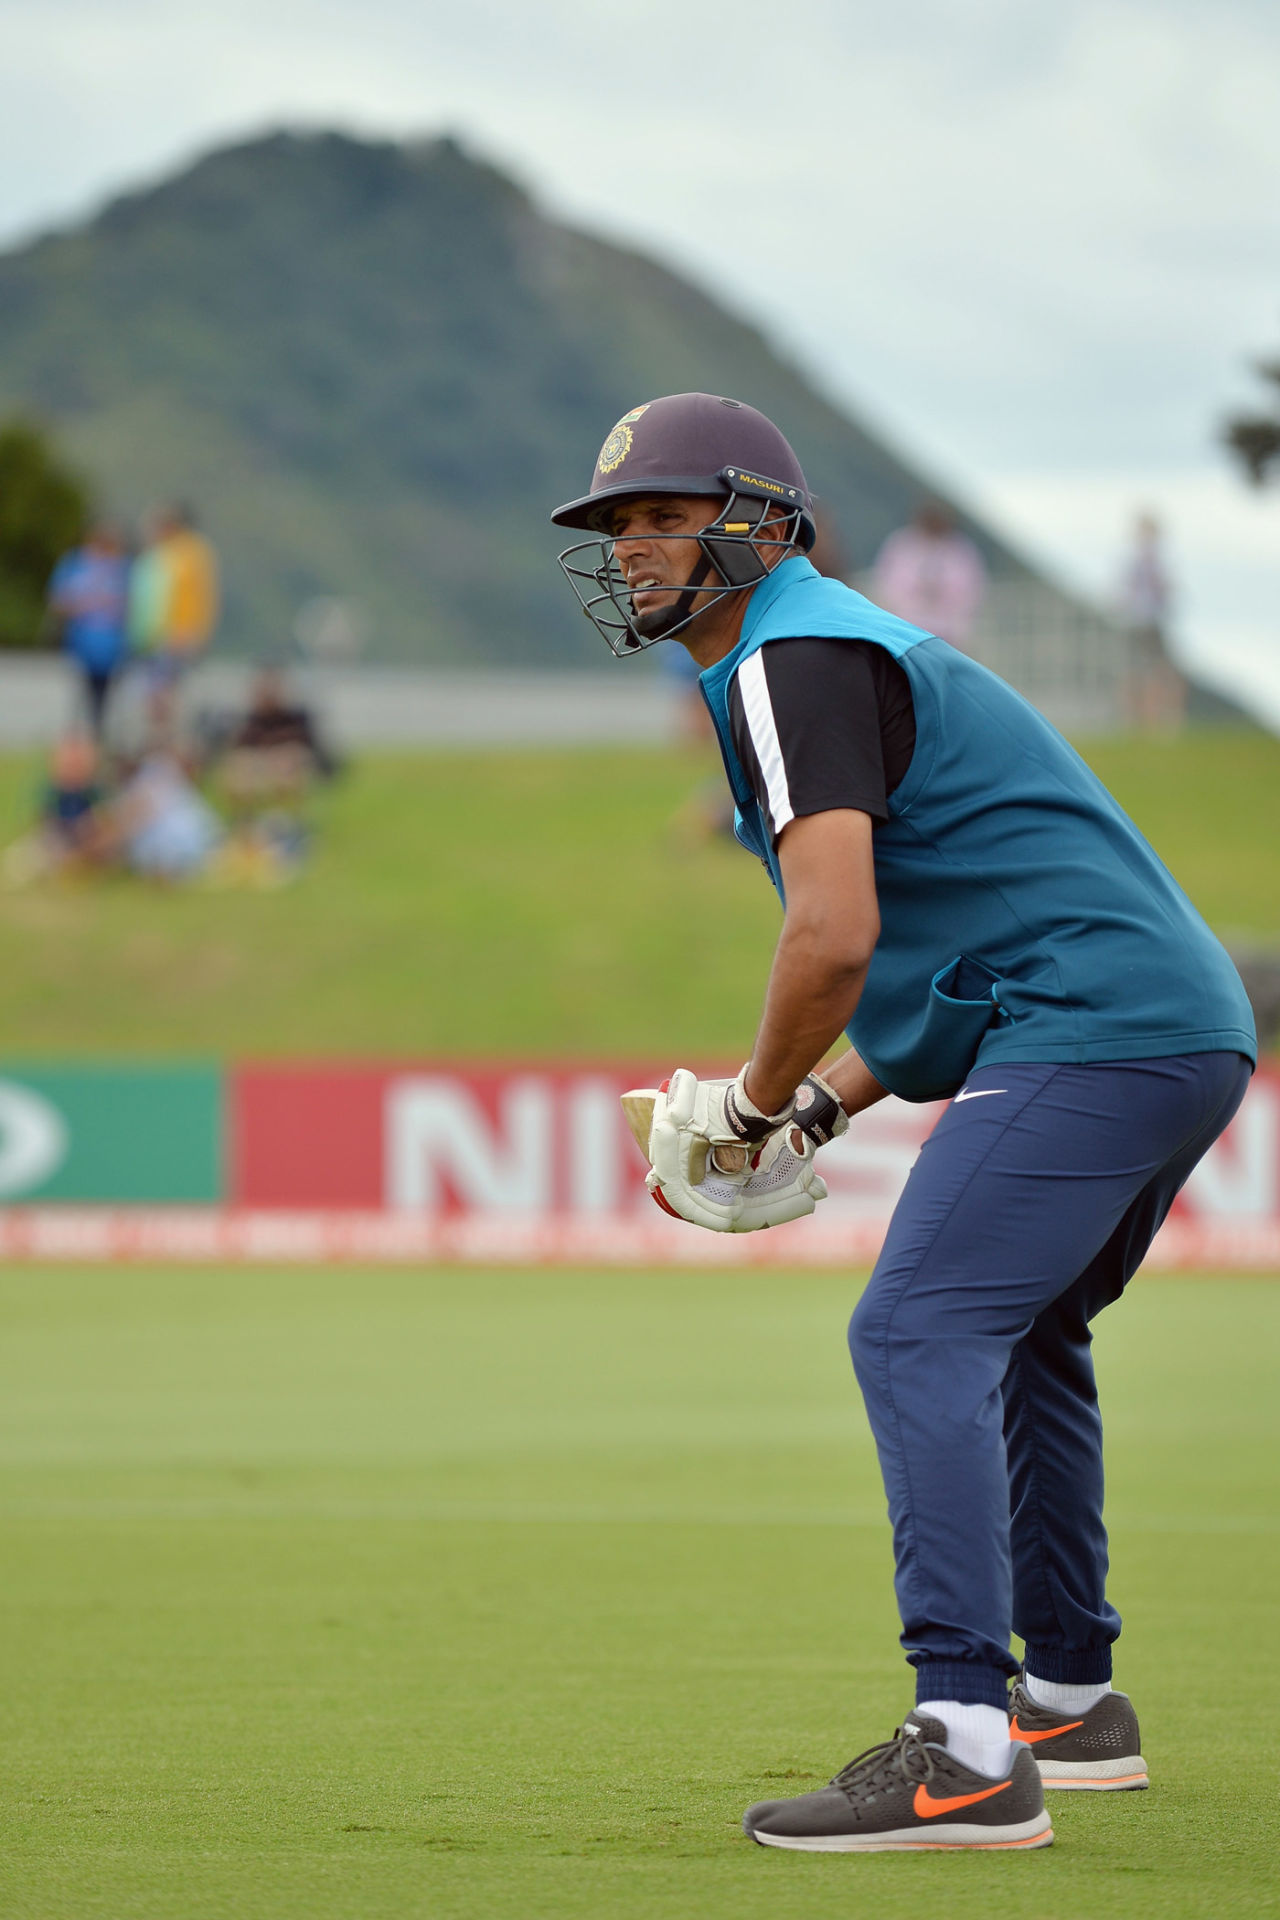 Rahul Dravid at work during the warm-up, Australia v India, Under-19 World Cup, final, Mount Maunganui, February 3, 2018